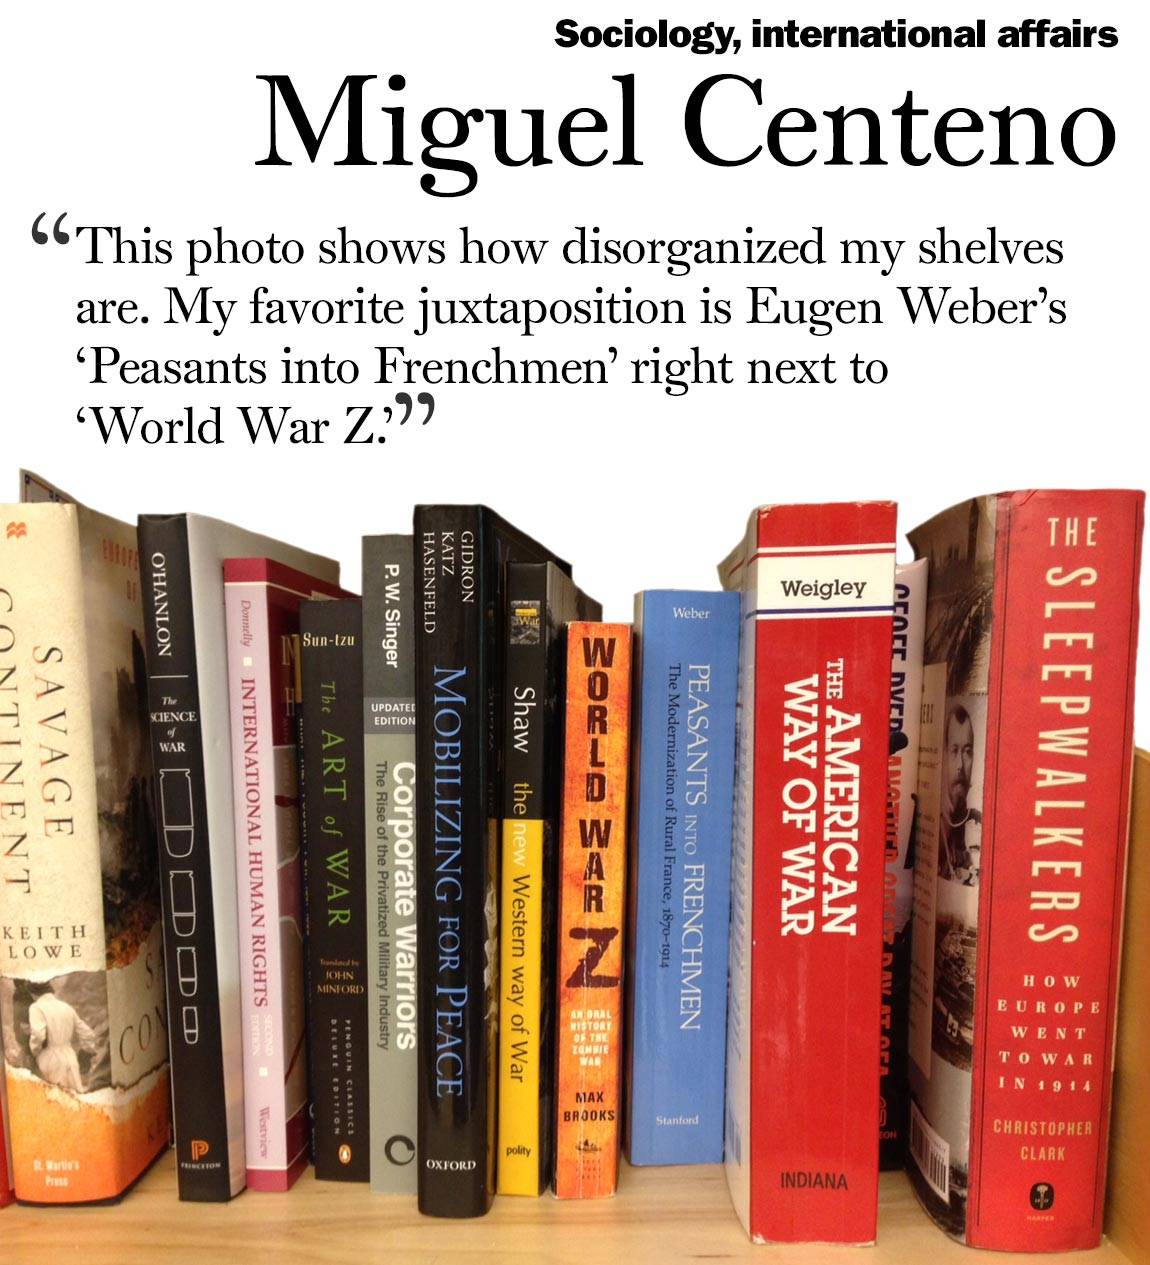 “This photo shows how disorganized my shelves are. My favorite juxtaposition is Eugen Weber’s ‘Peasants into Frenchmen’ right next to  ‘World War Z.’” Miguel Centeno, sociology, international affairs